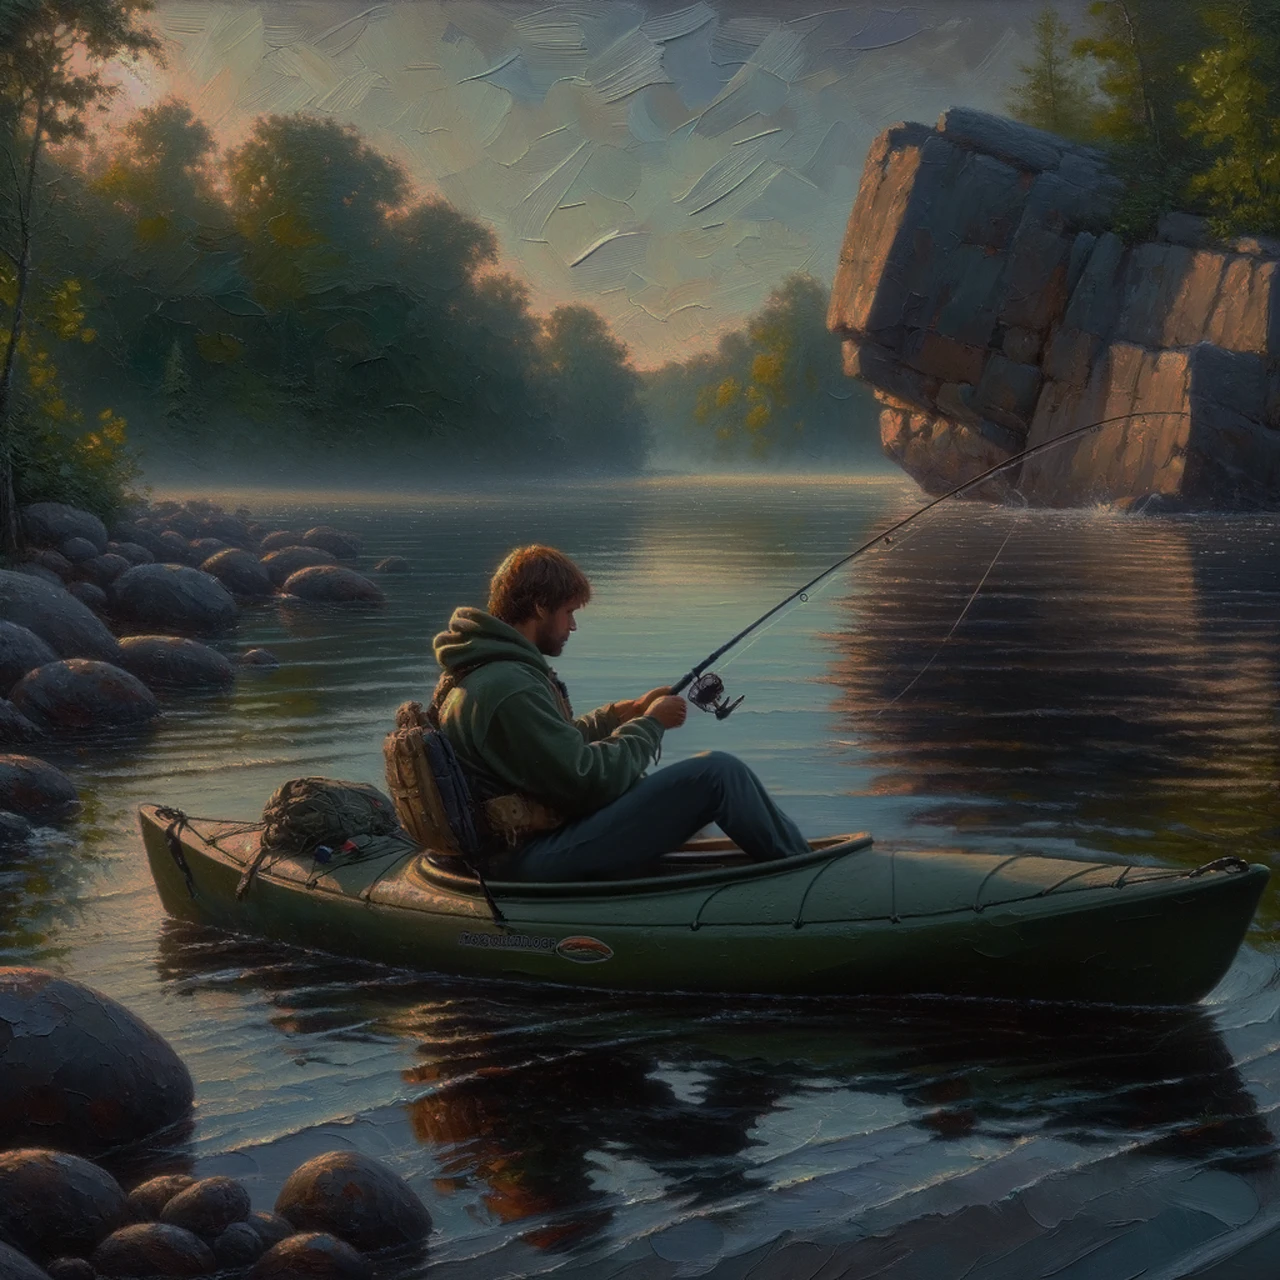 An impressionist style painting of a man sitting in a kayak fishing